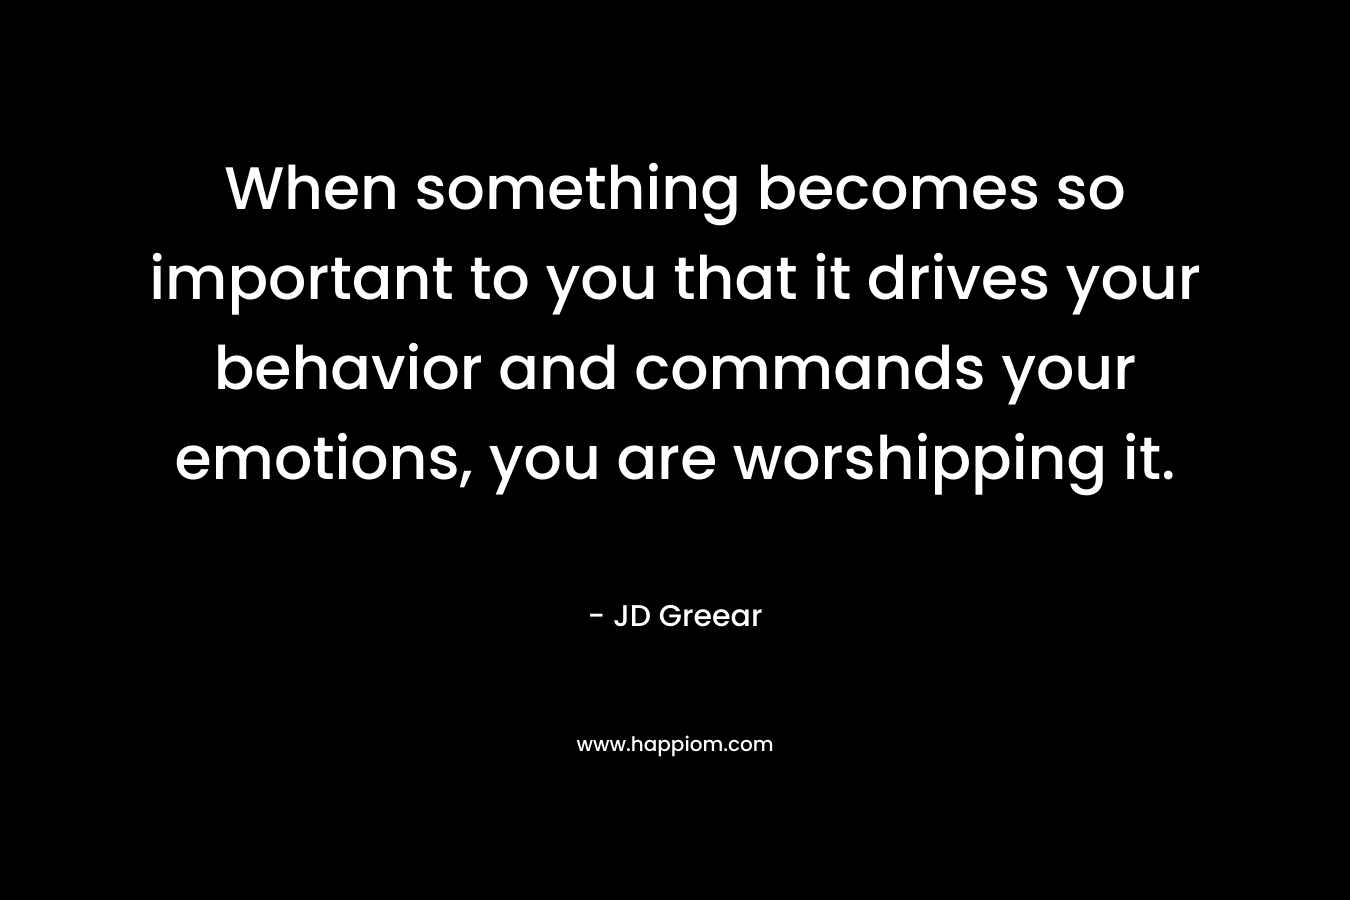 When something becomes so important to you that it drives your behavior and commands your emotions, you are worshipping it. – JD Greear